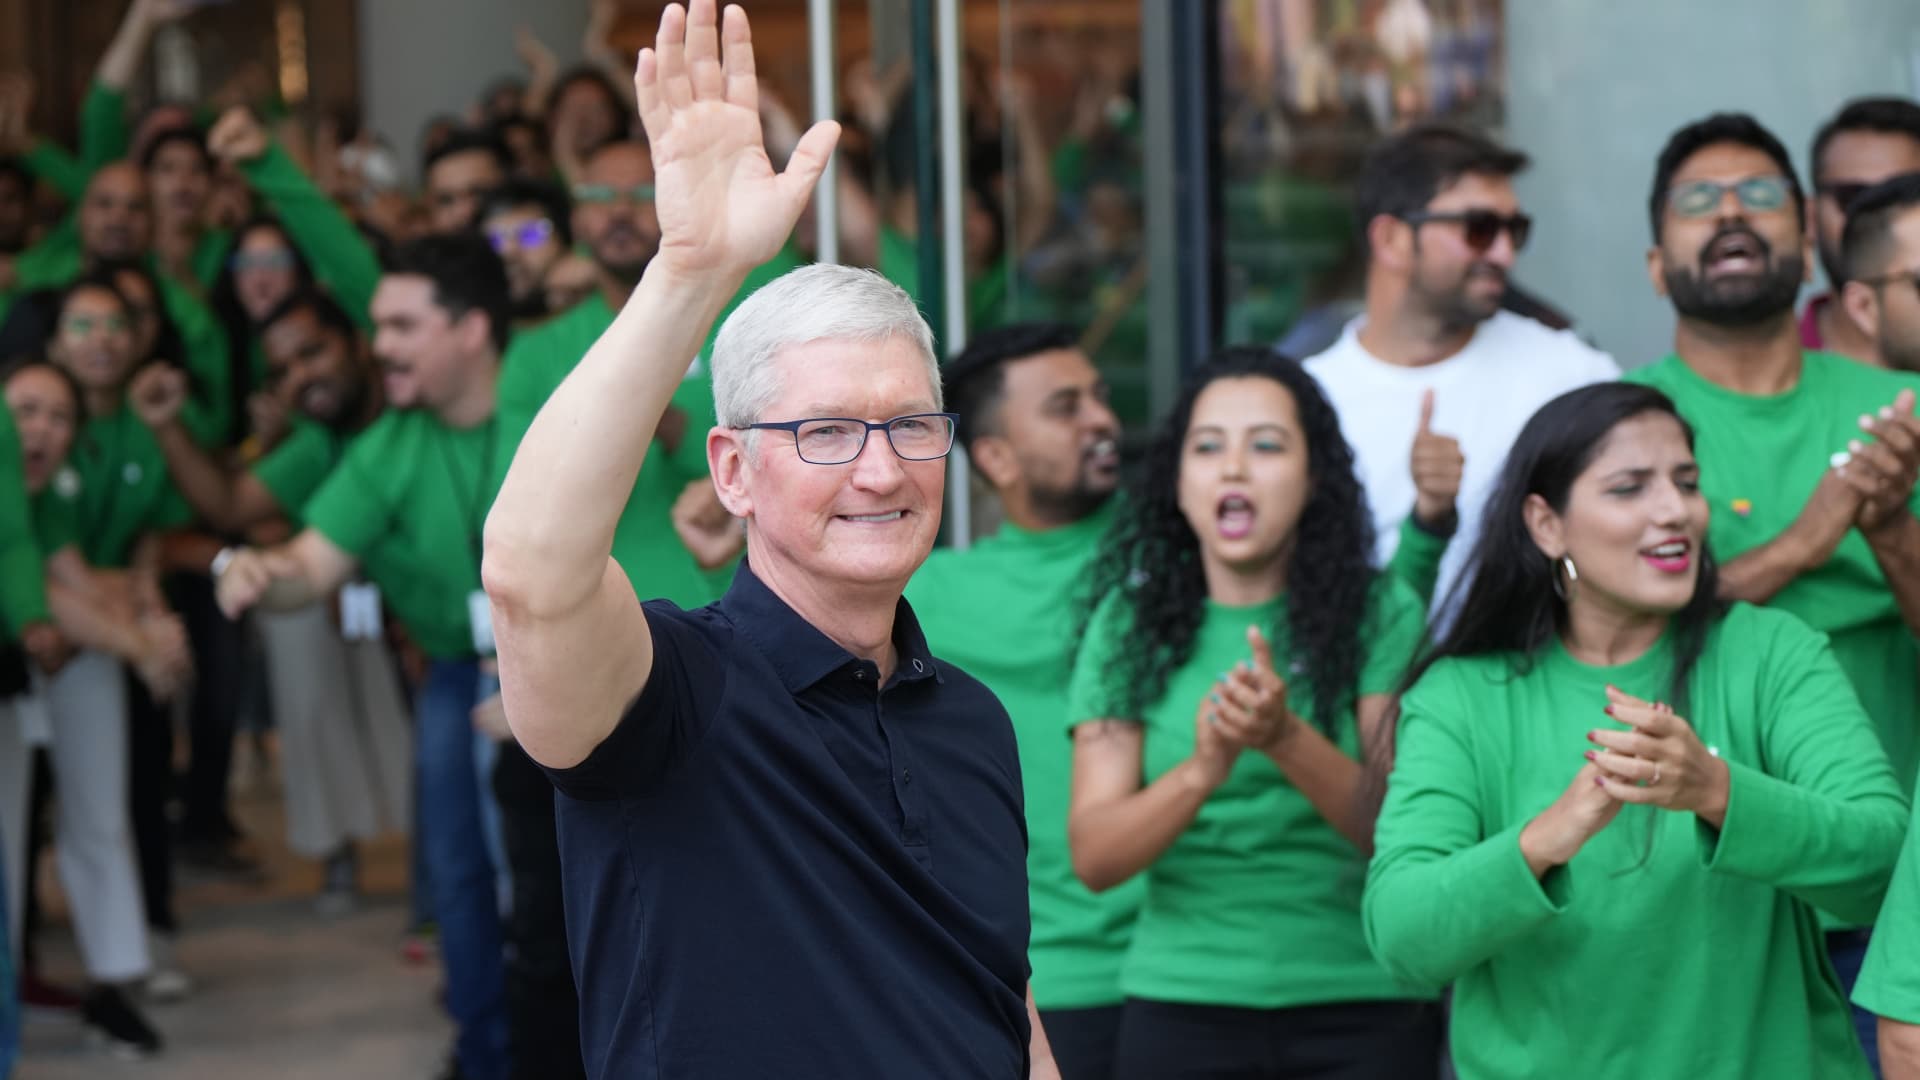 Apple reports better-than-expected quarter driven by iPhone sales 